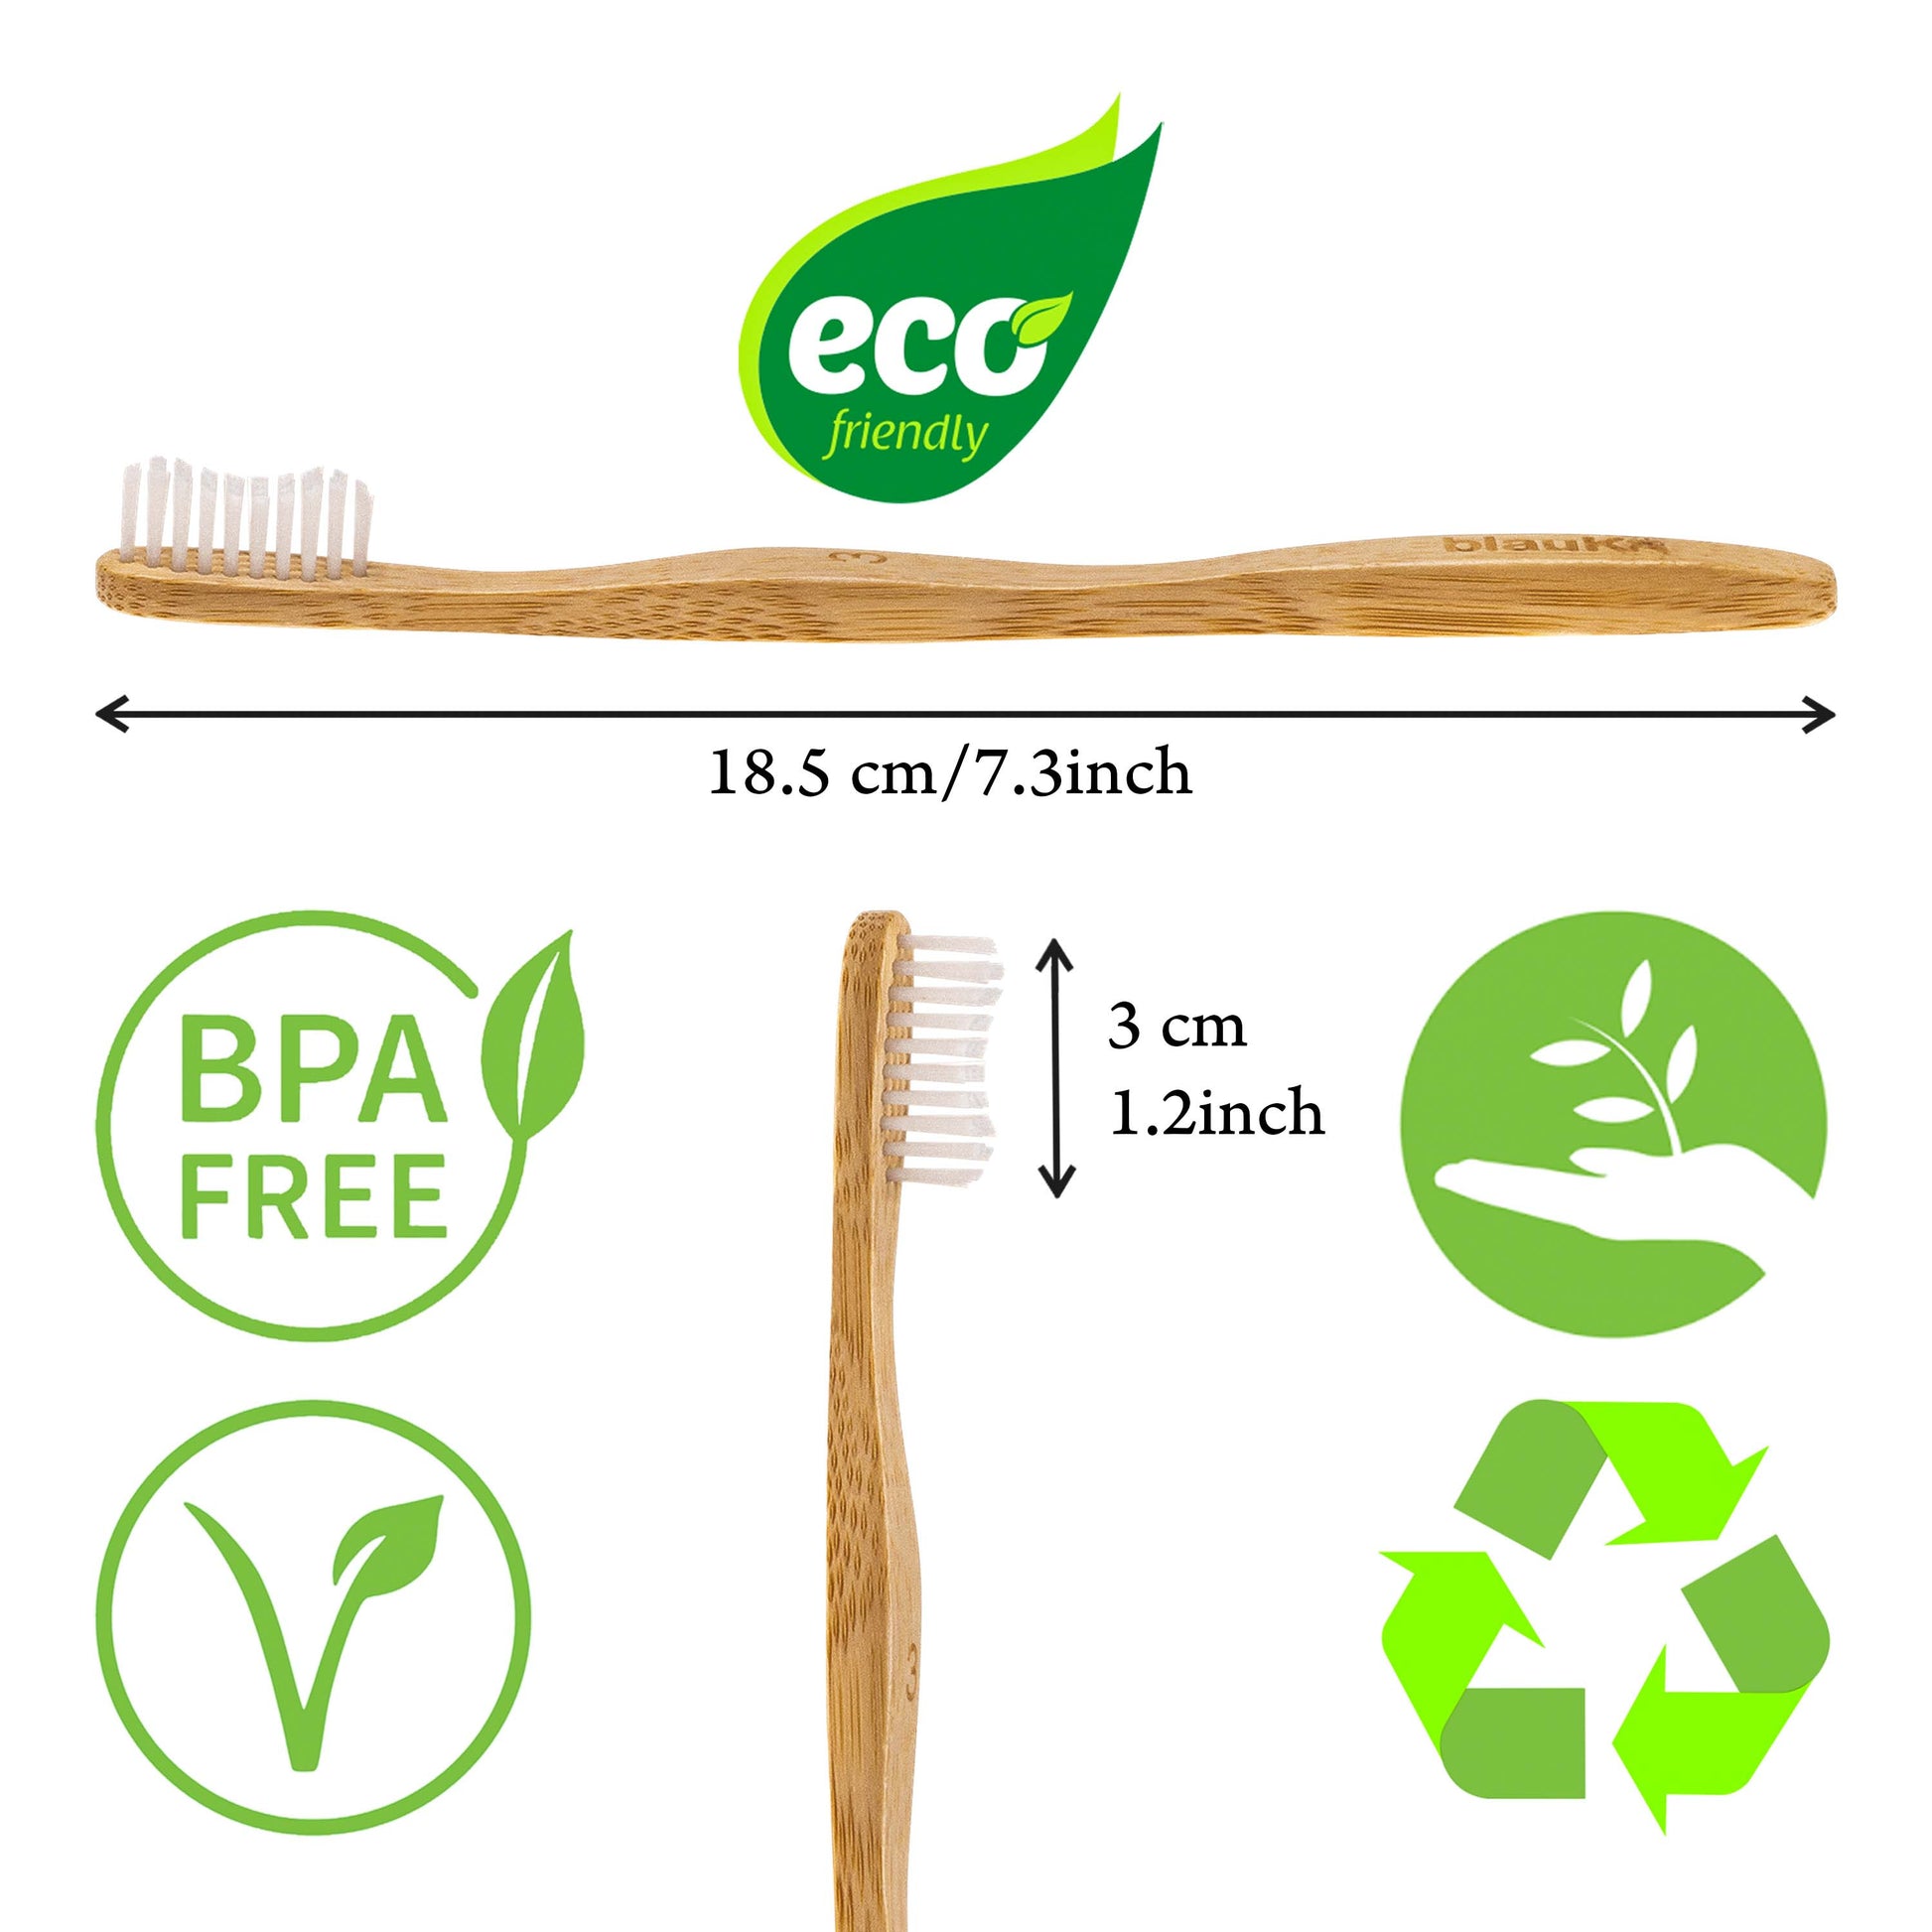 Bamboo Toothbrush Set 4-Pack - Bamboo Toothbrushes with Medium Bristles for Adults - Eco-Friendly, Biodegradable, Natural Wooden Toothbrushes-2